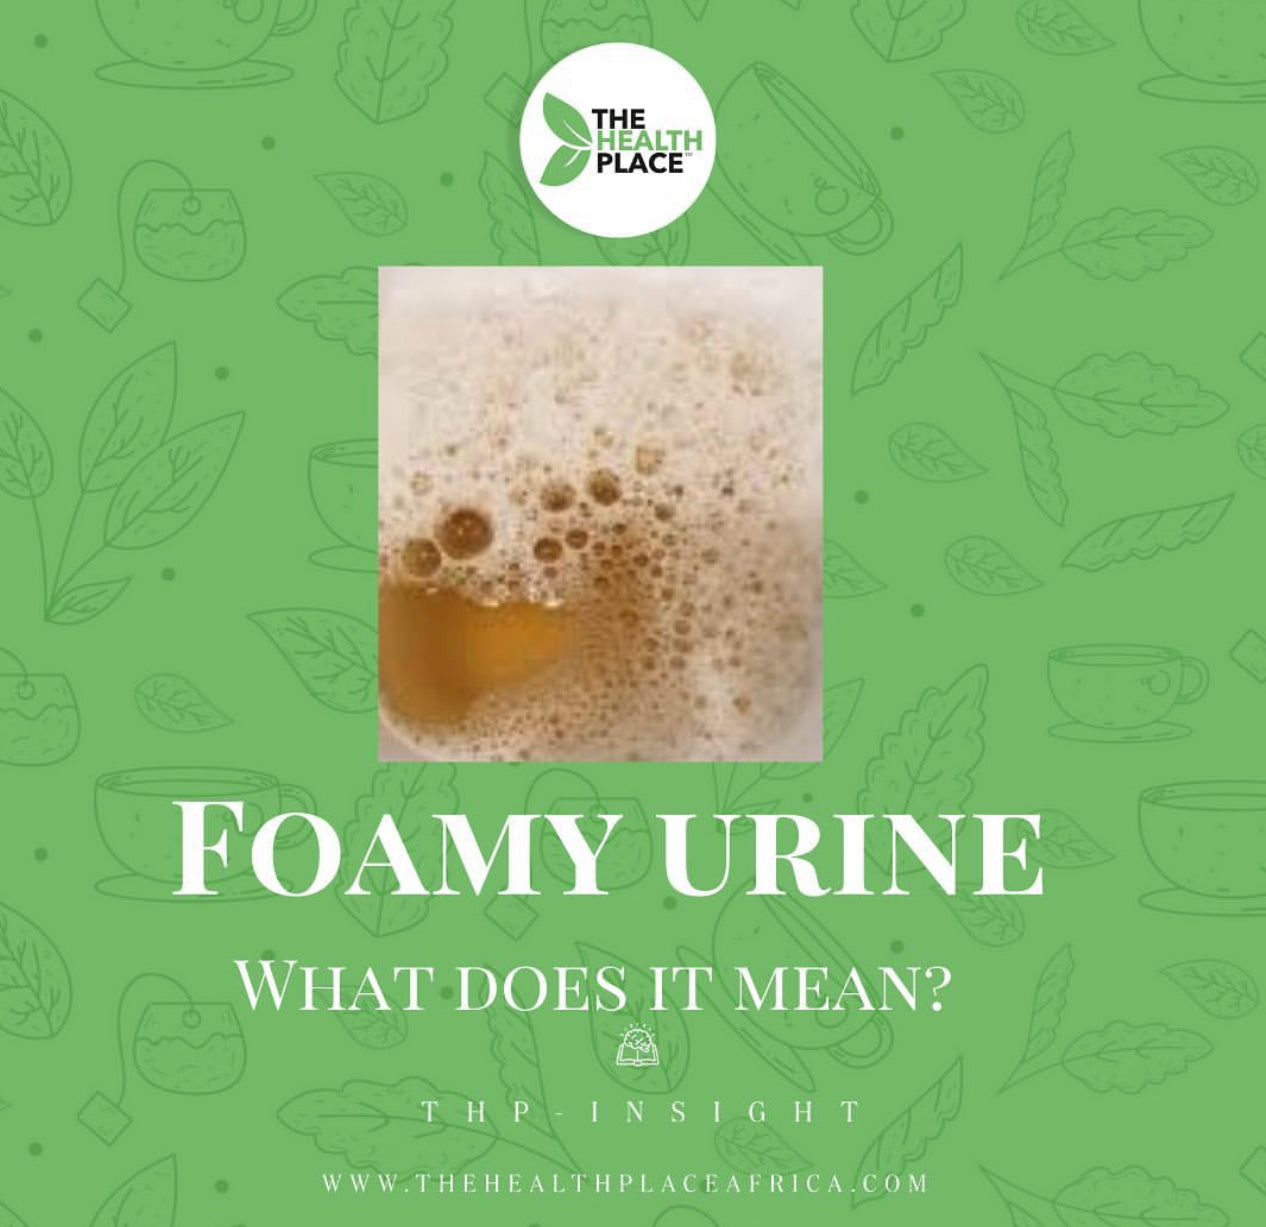 FOAMY URINE: WHAT DOES IT MEAN?